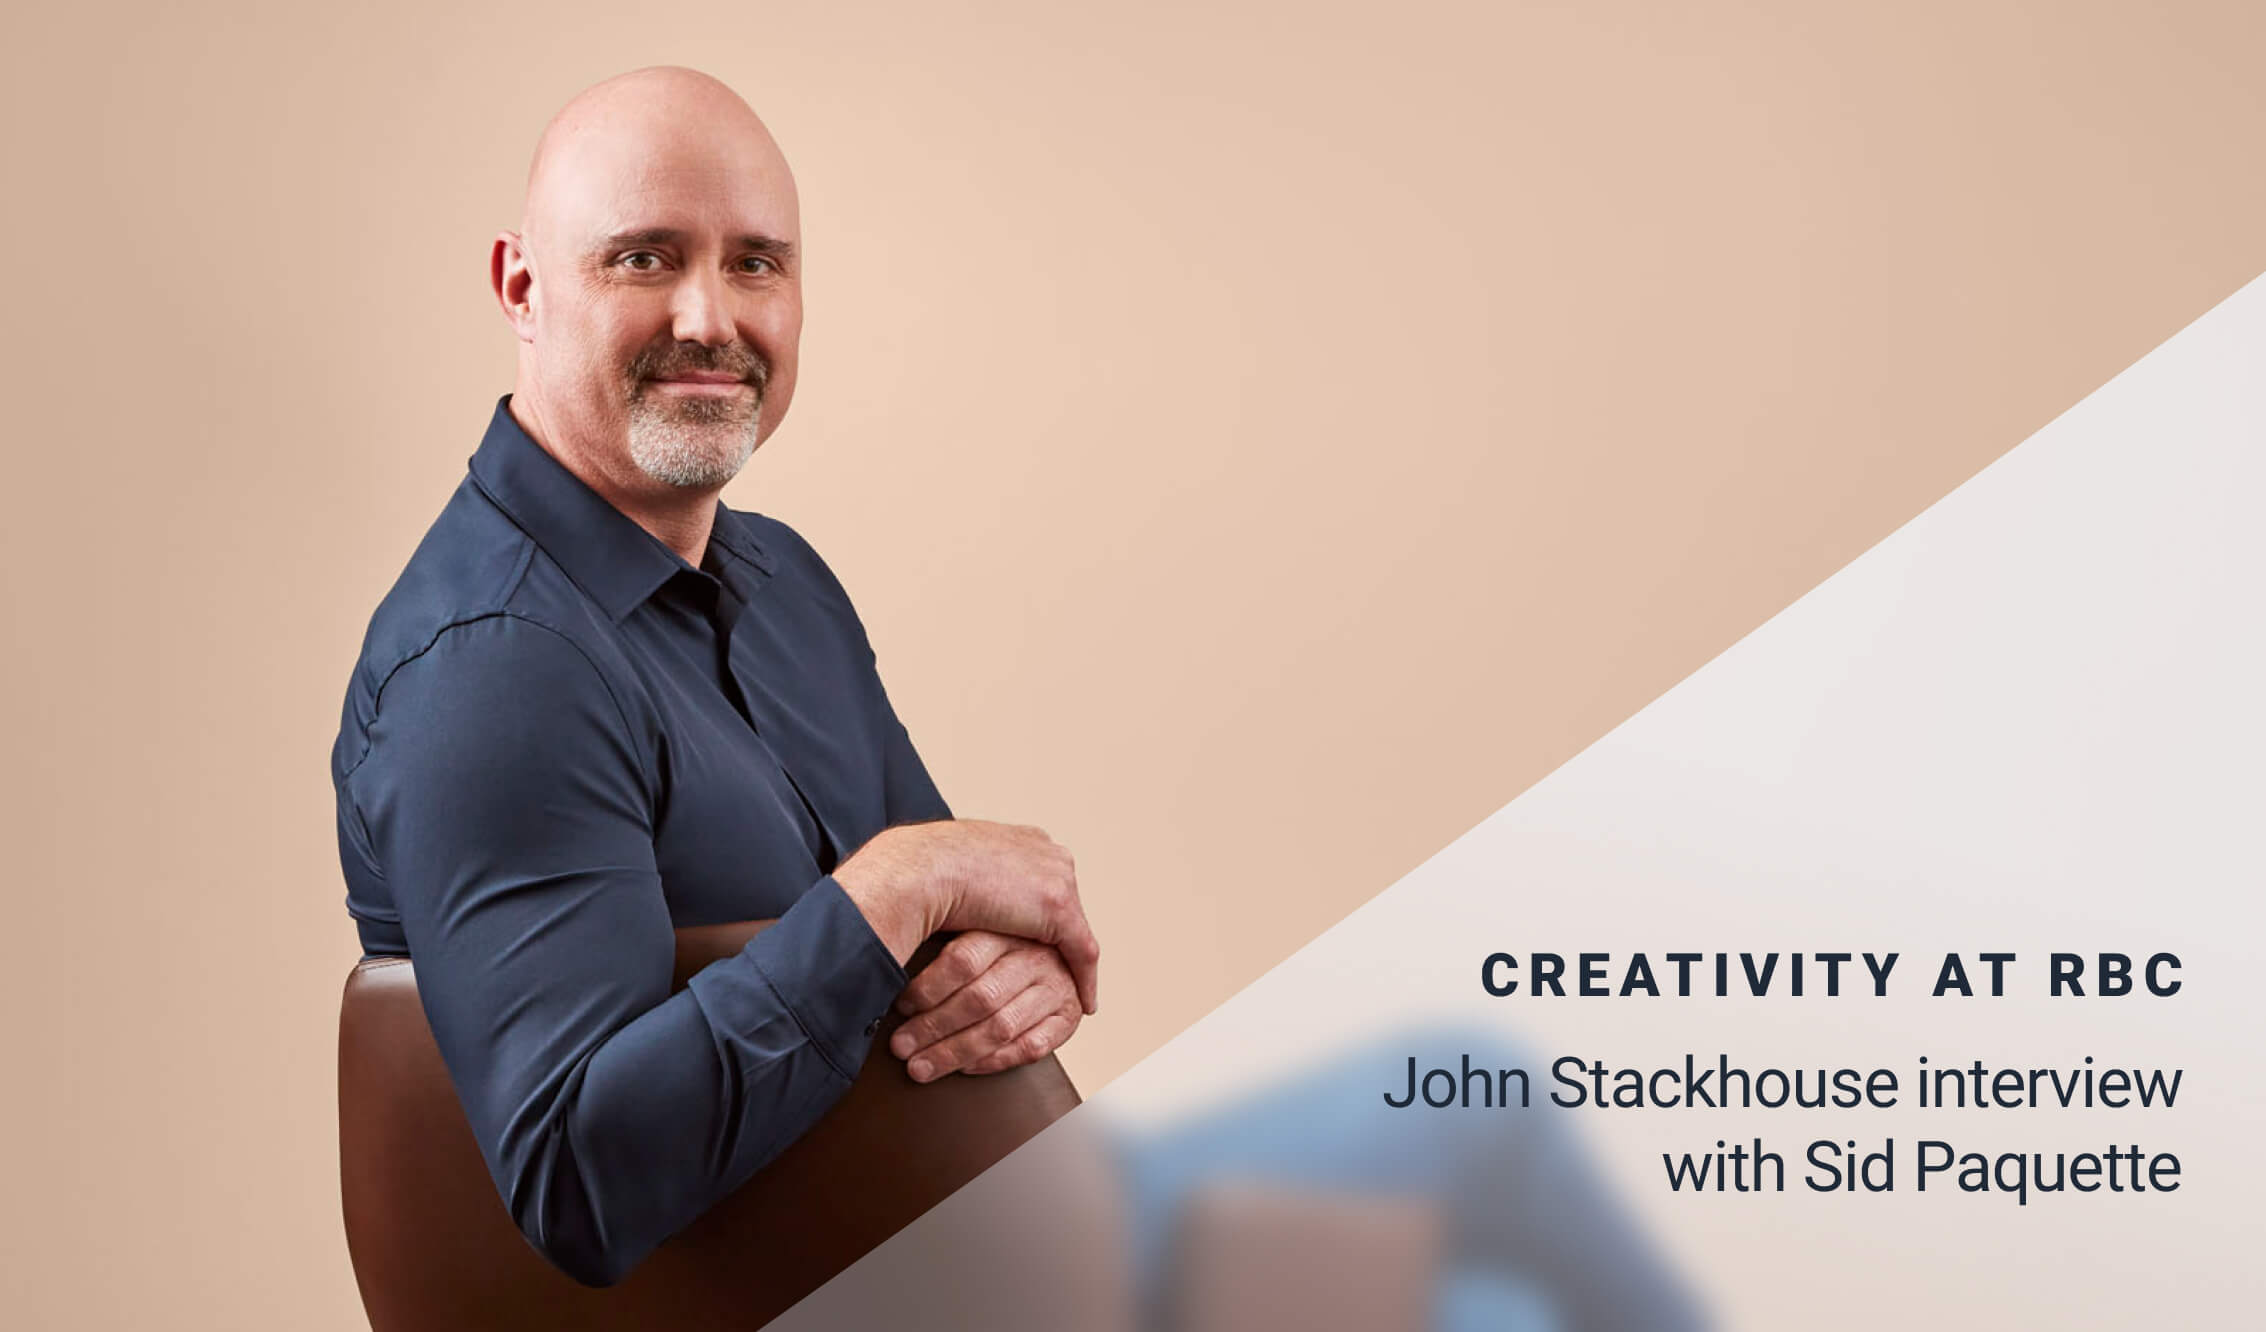 Creativity at RBC: John Stackhouse interview with Sid Paquette